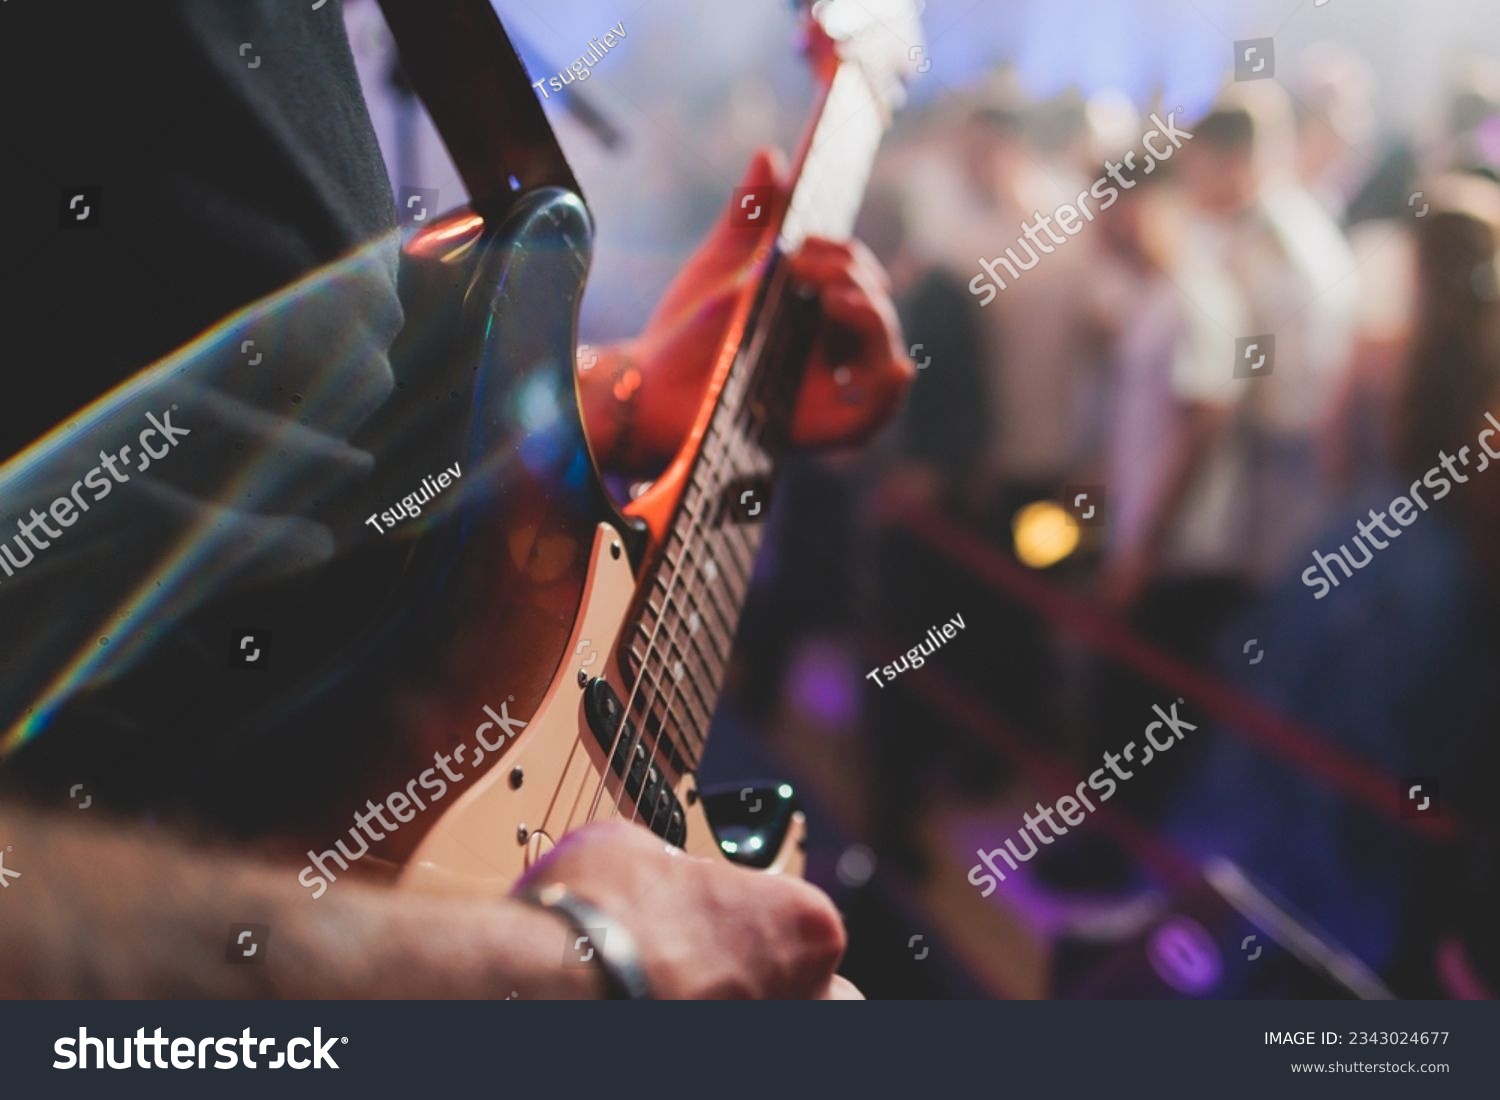 Concert view of an electric guitar player with vocalist and rock band performing in a club, male musician guitarist on stage with audience in a crowded concert hall arena
 #2343024677